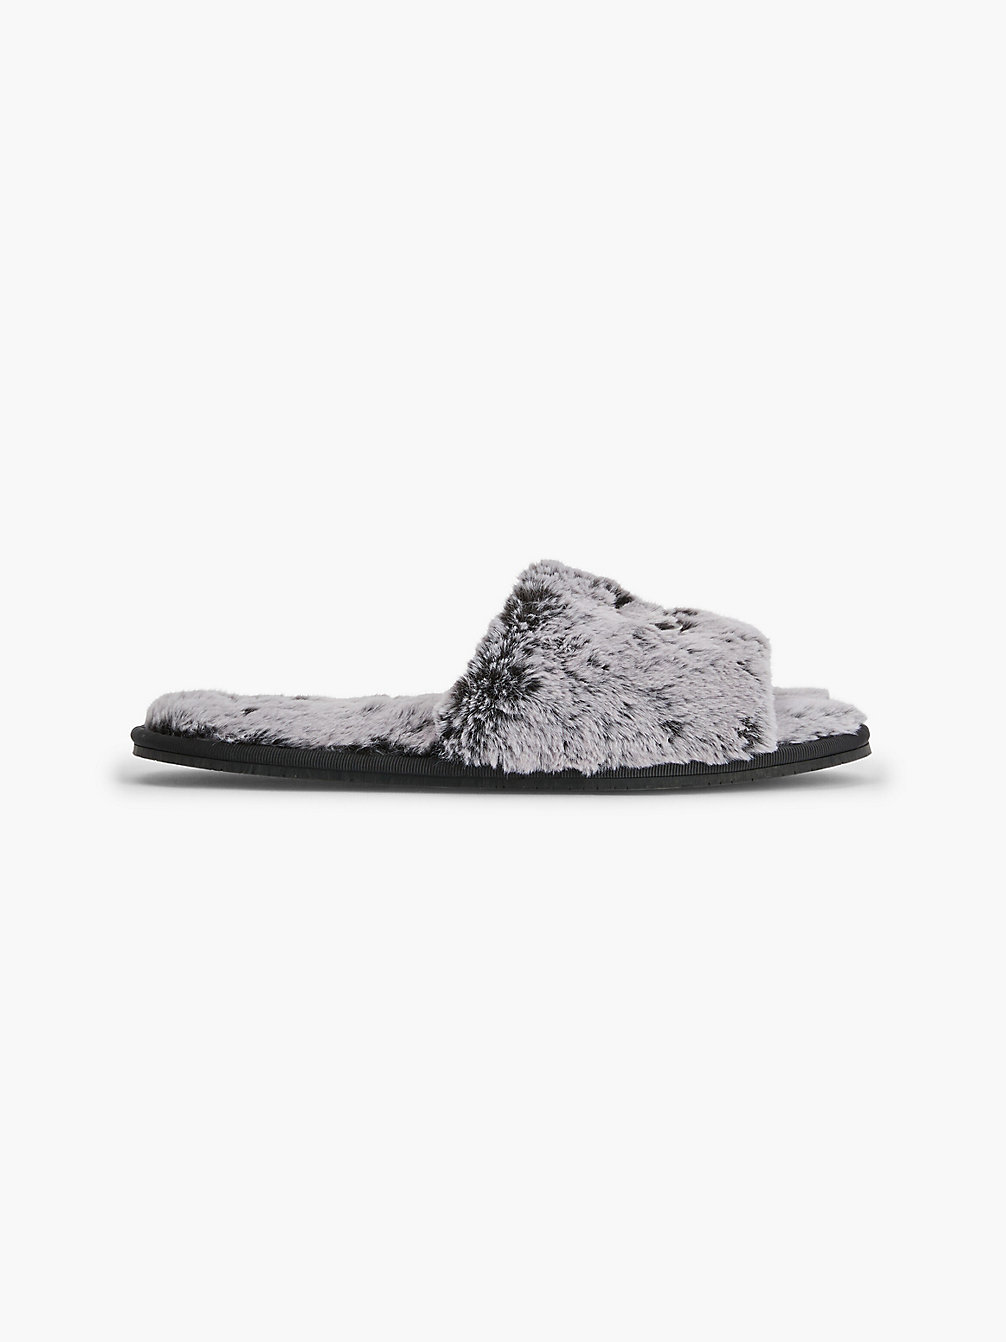 LIGHT GREY Recycled Faux Fur Slippers undefined women Calvin Klein